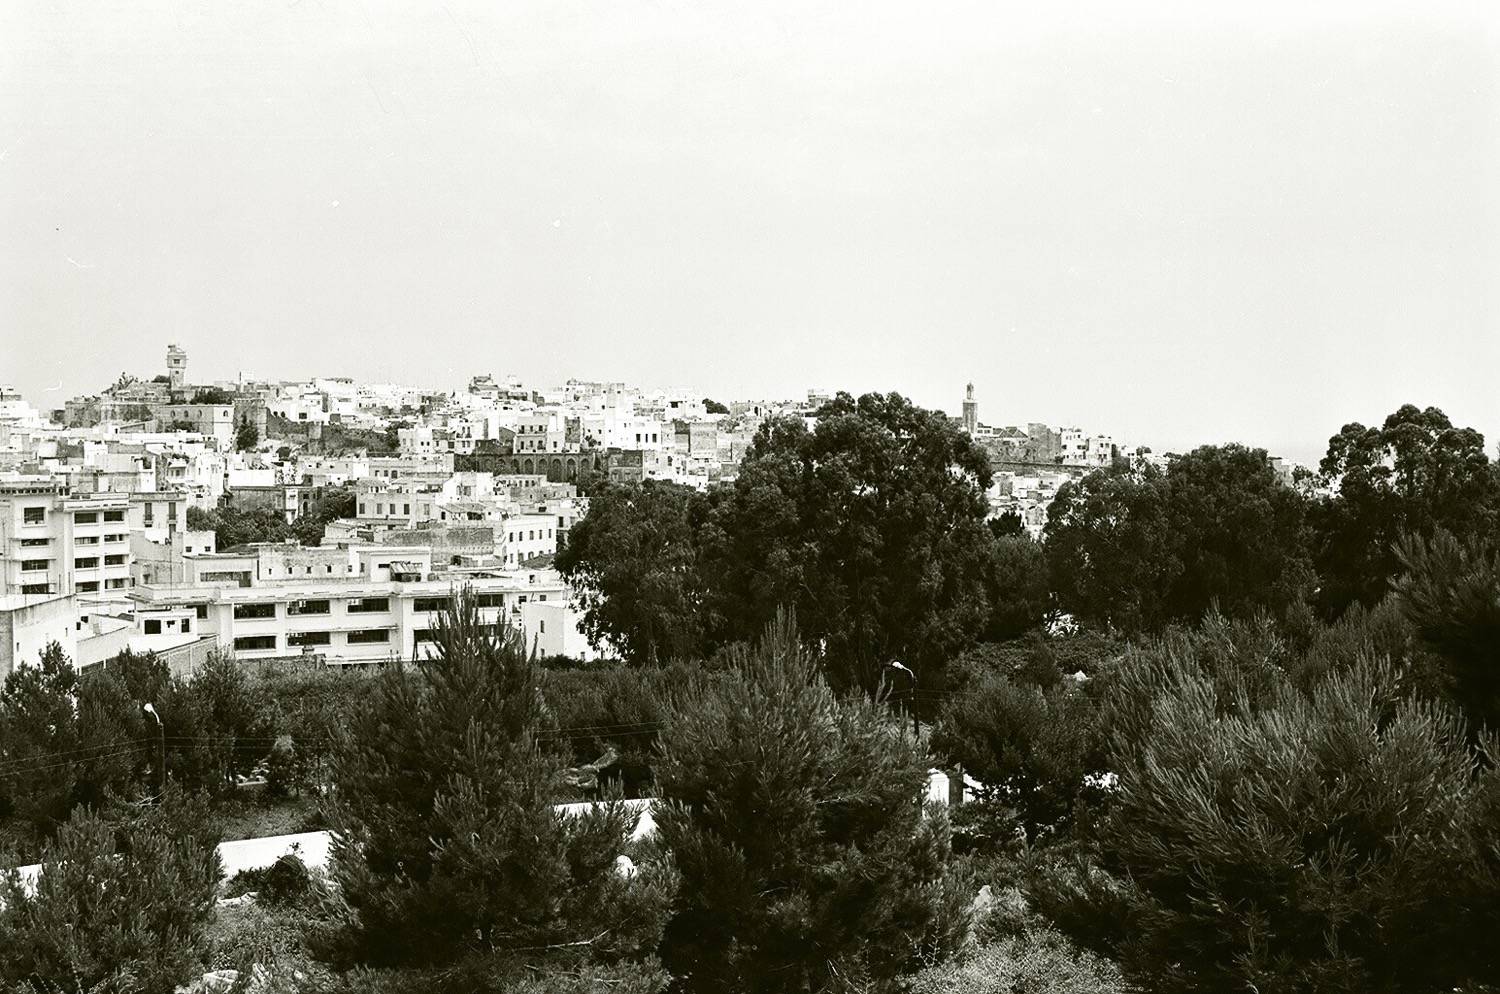 General view of the city from the cemetery toward the Casbah